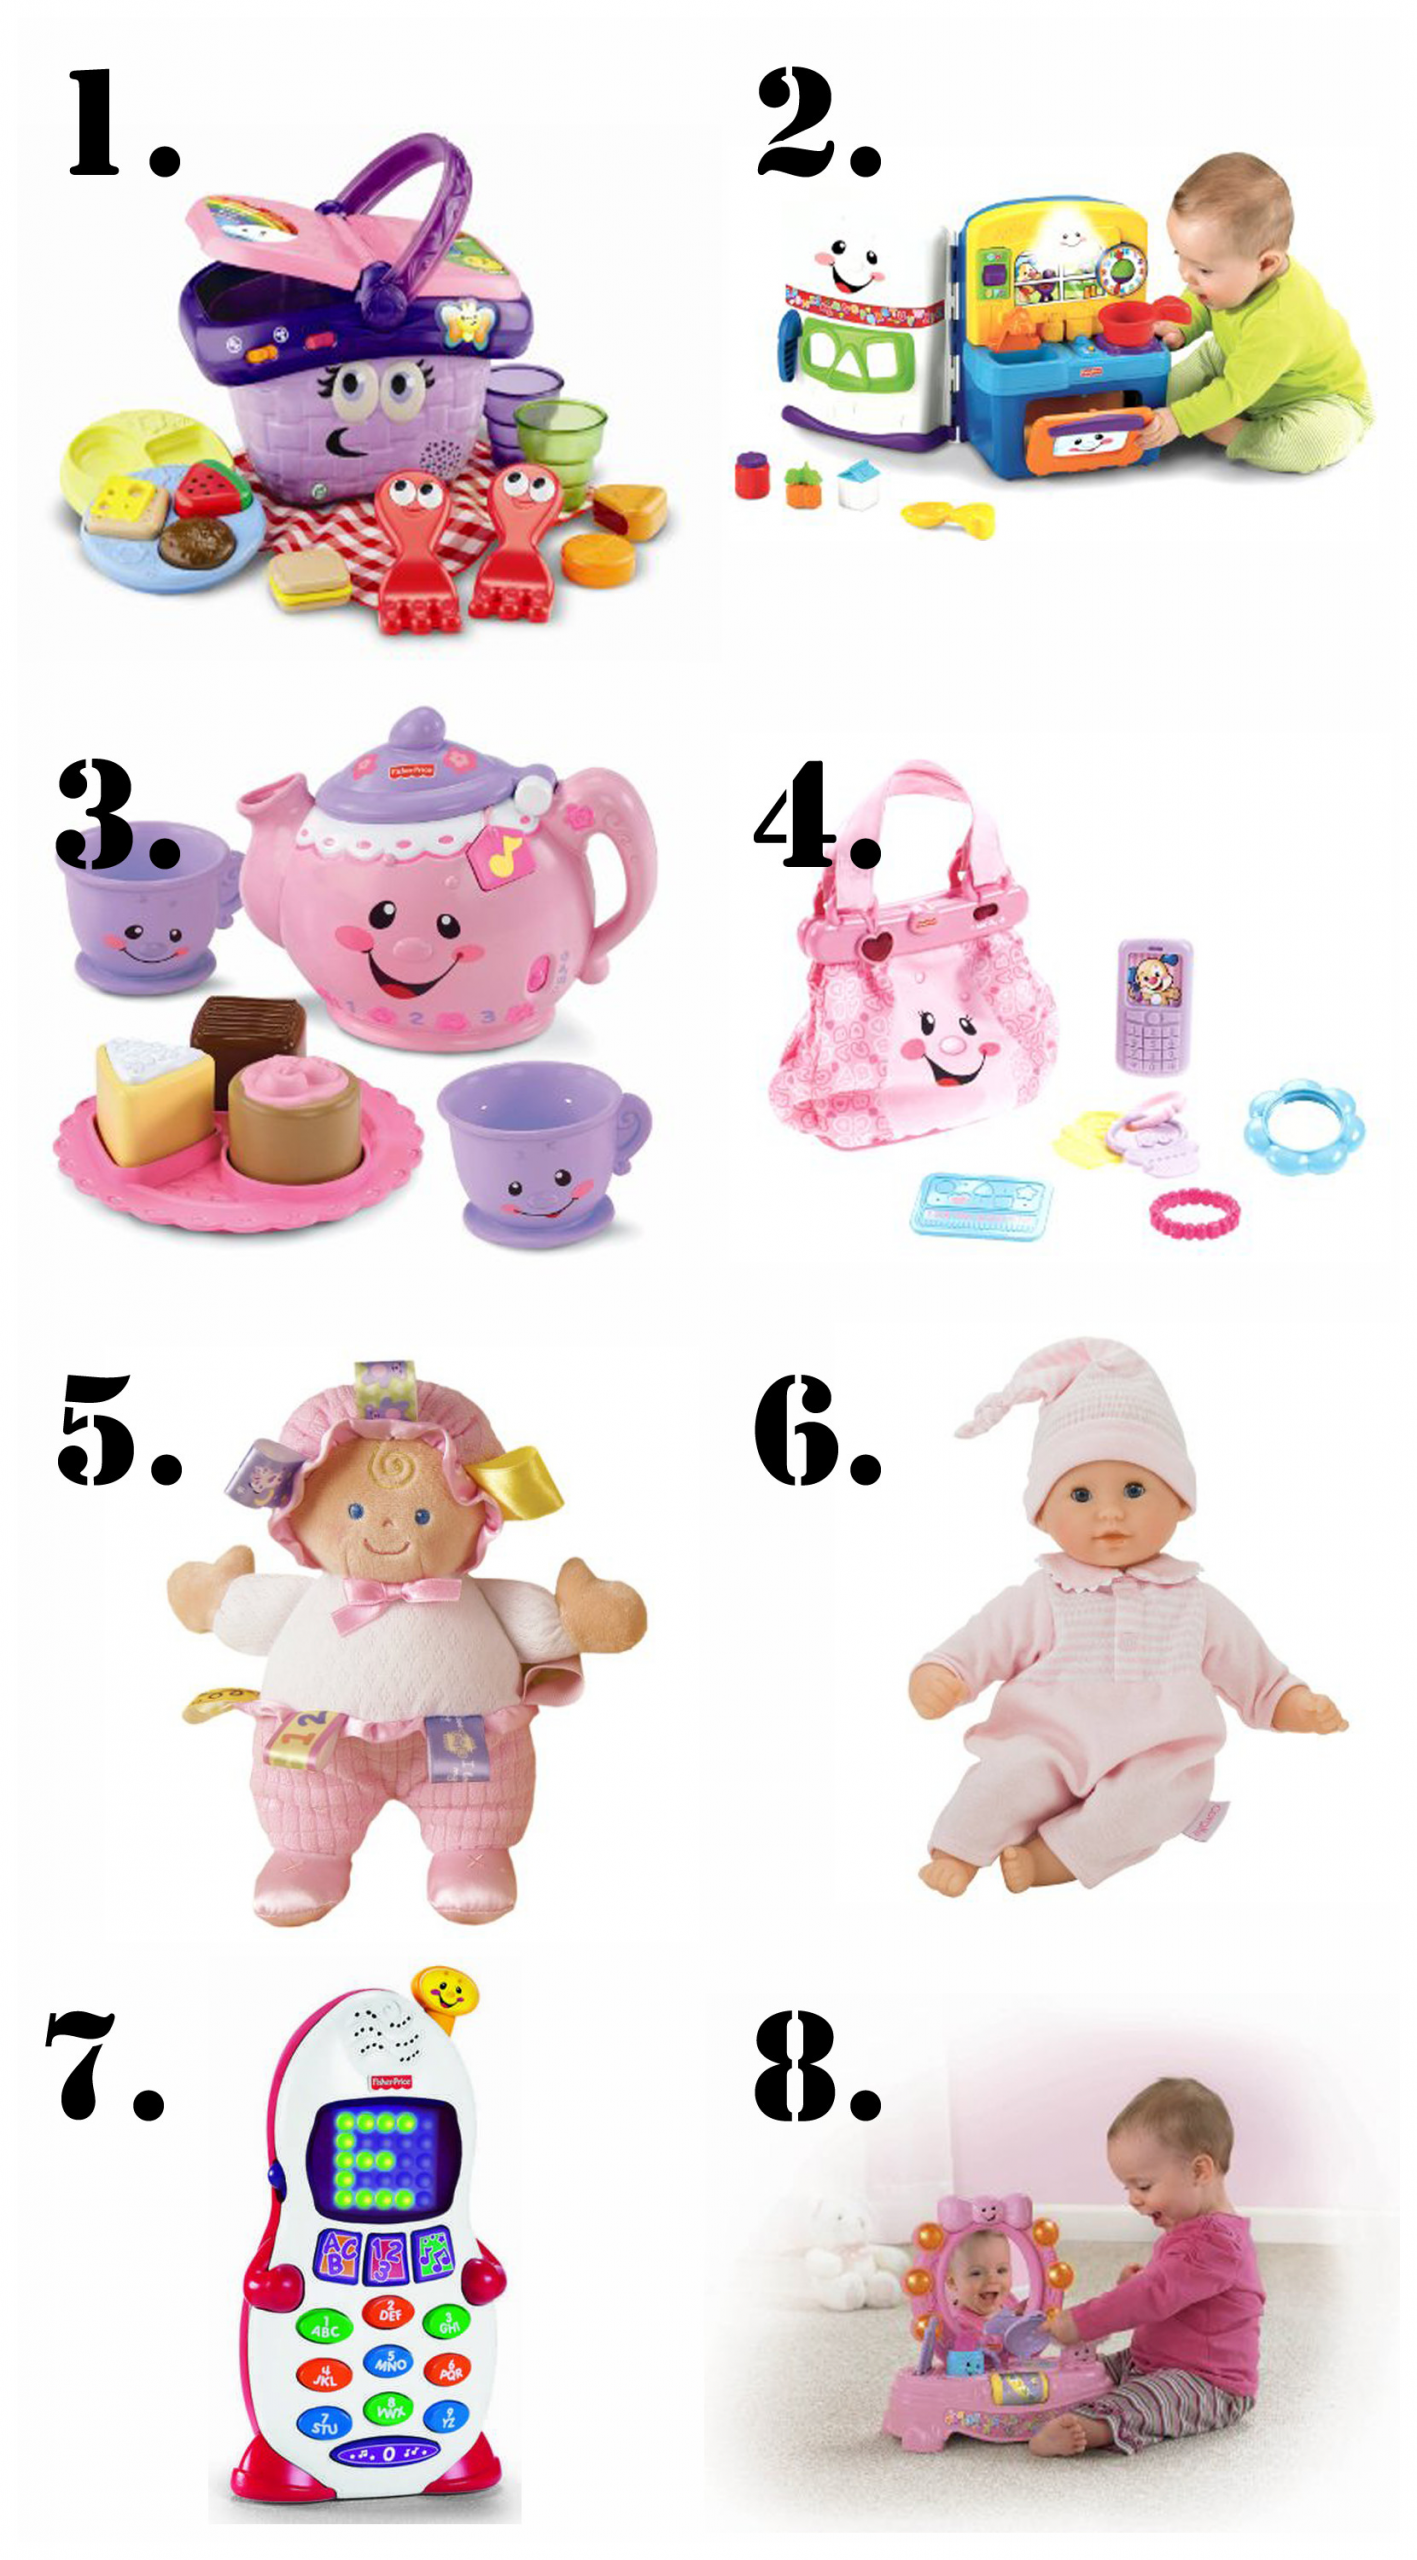 Girls 1St Birthday Gift Ideas
 best birthday presents for a 1 year old